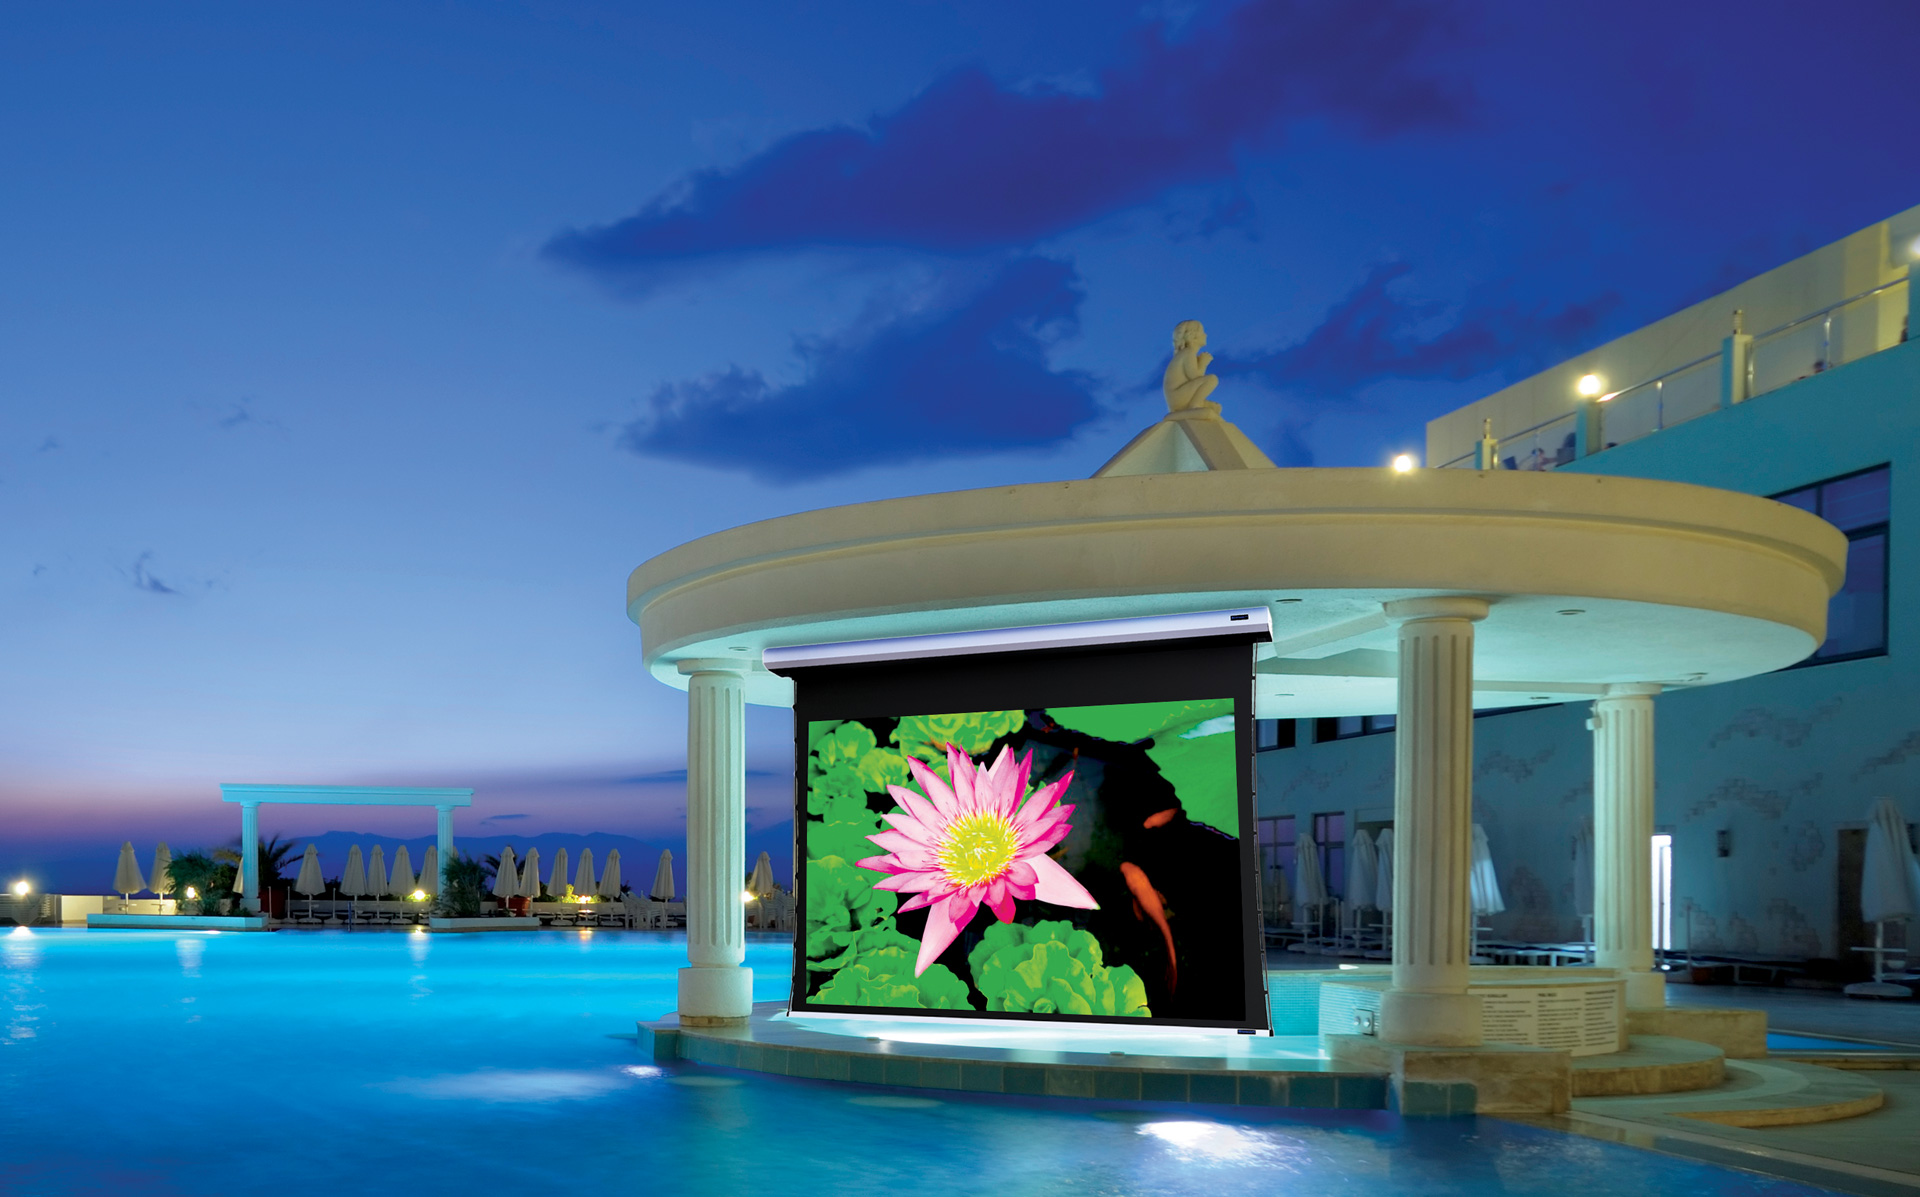 Example of electronically controlled retractable projection screens in Calgary, designed specifically for outdoor use. 